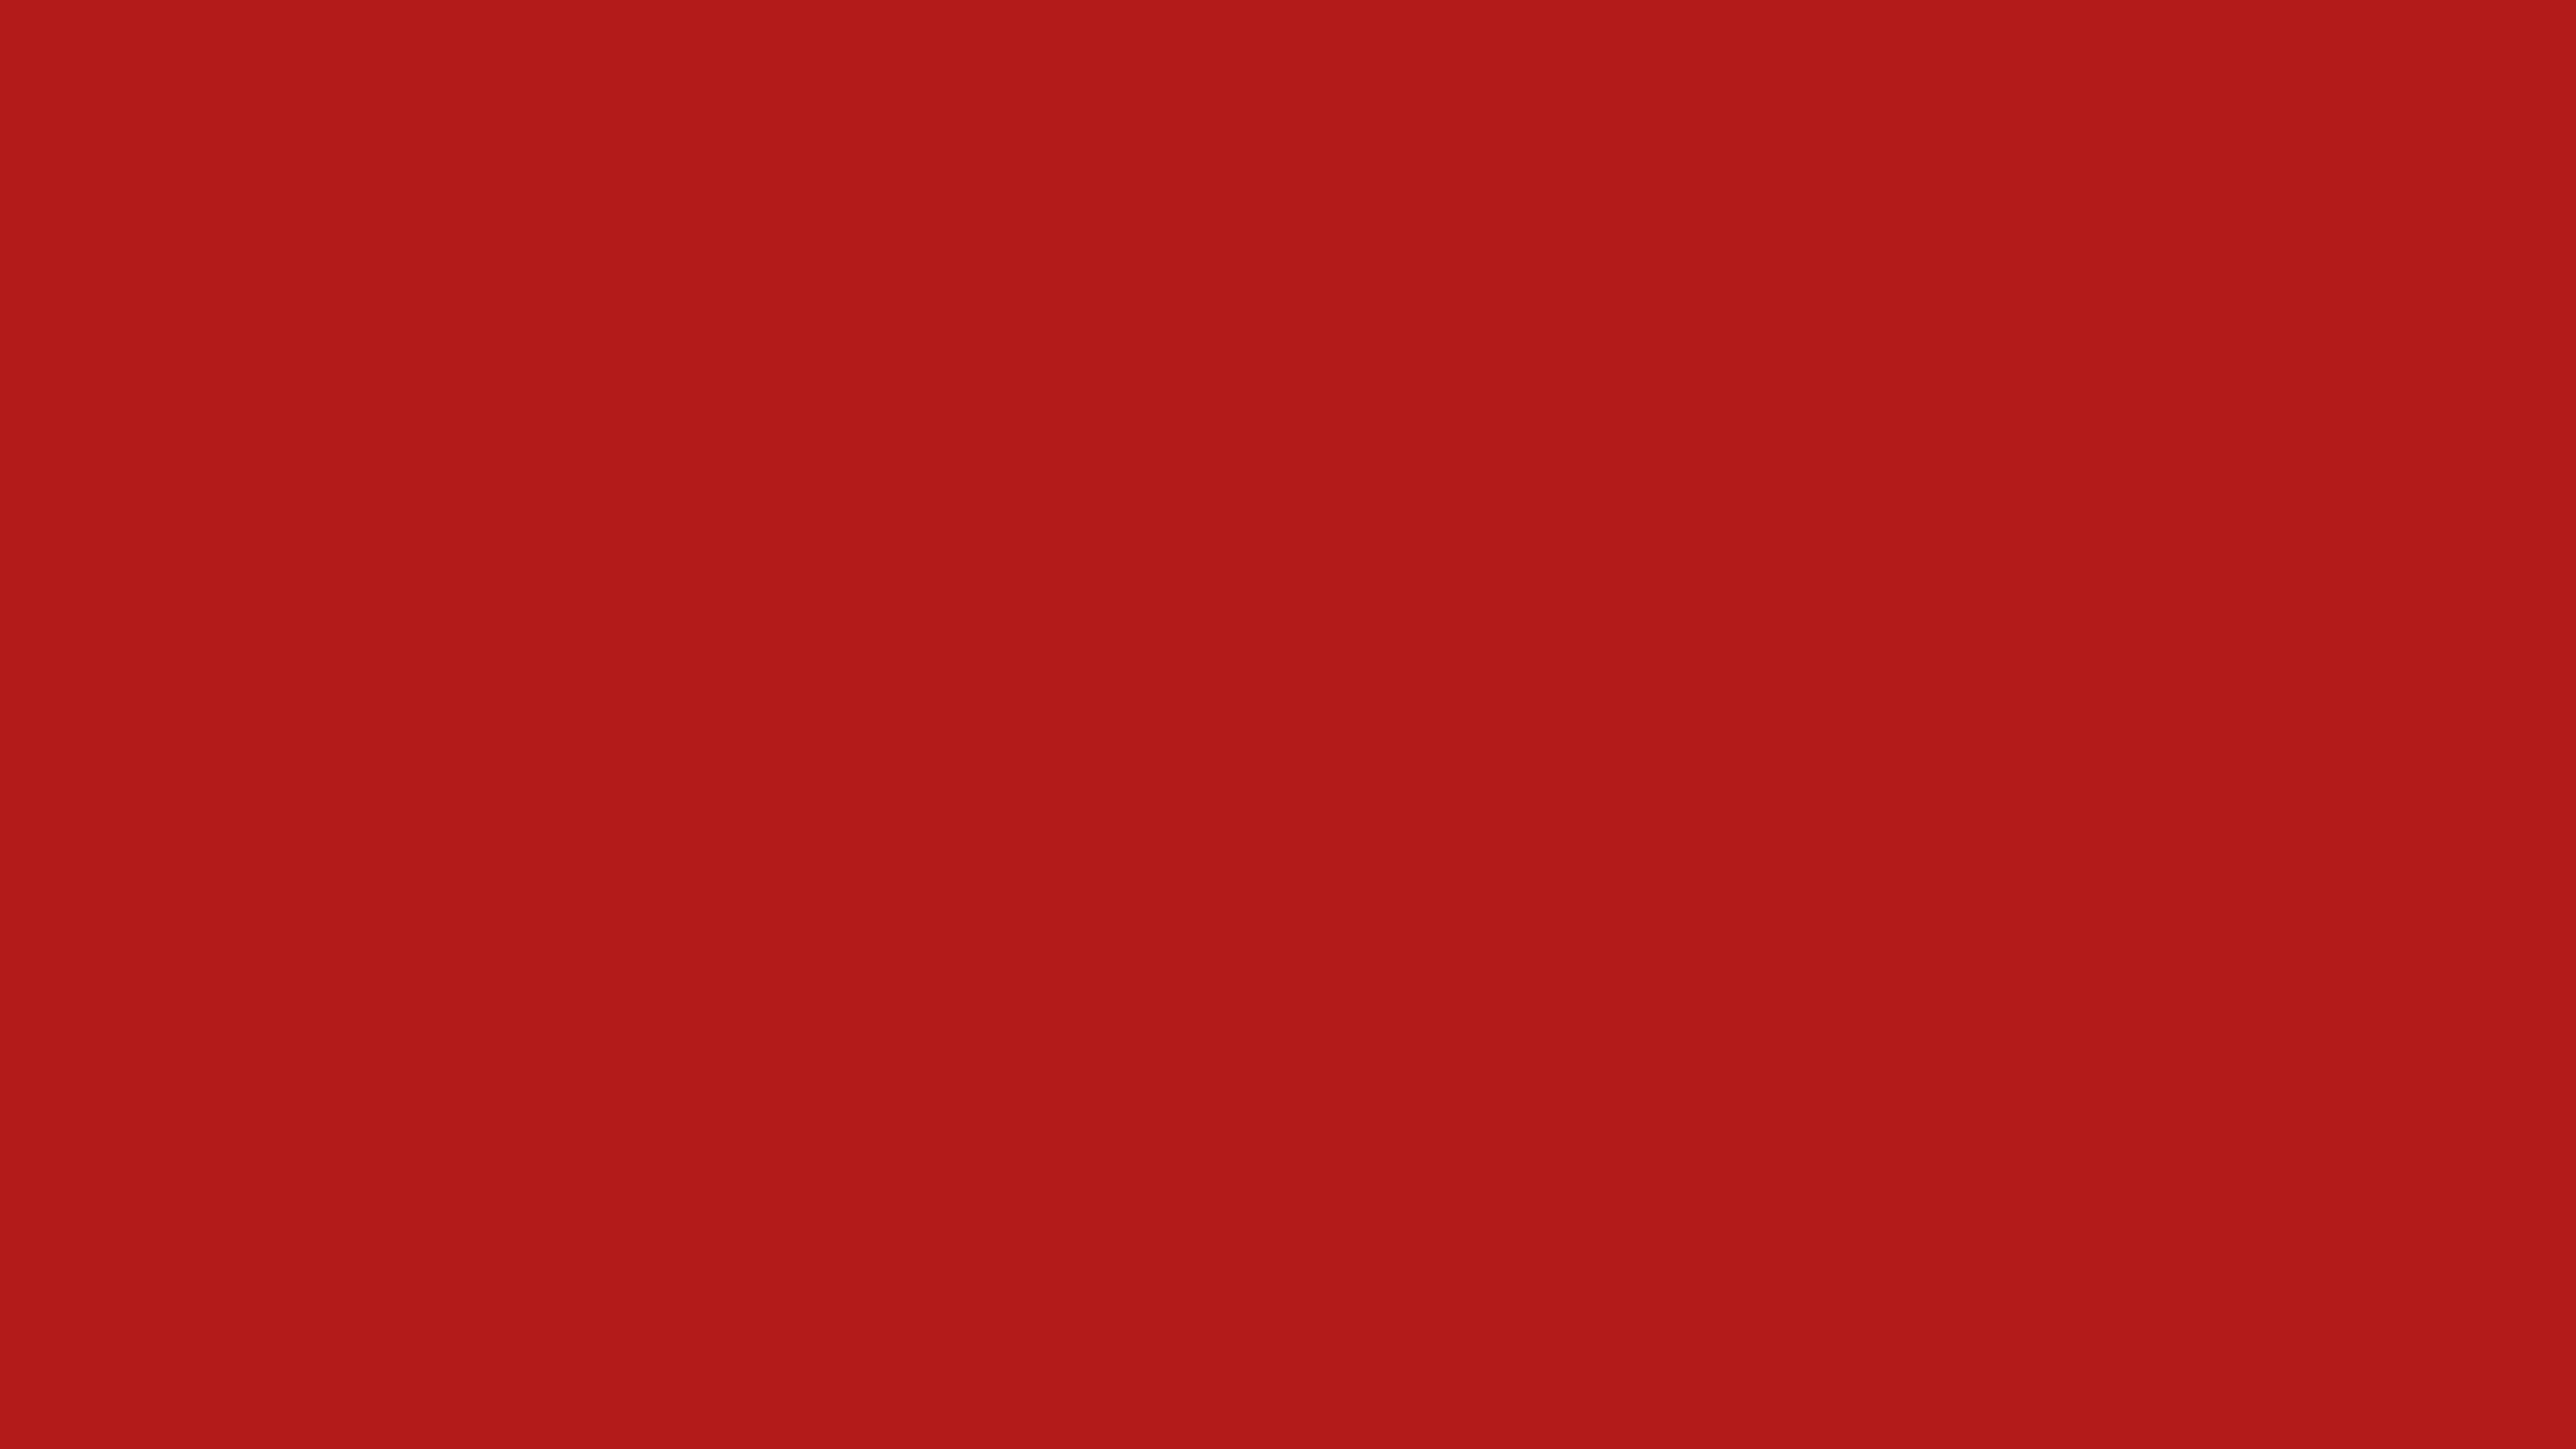 7680x4320 Cornell Red Solid Color Background